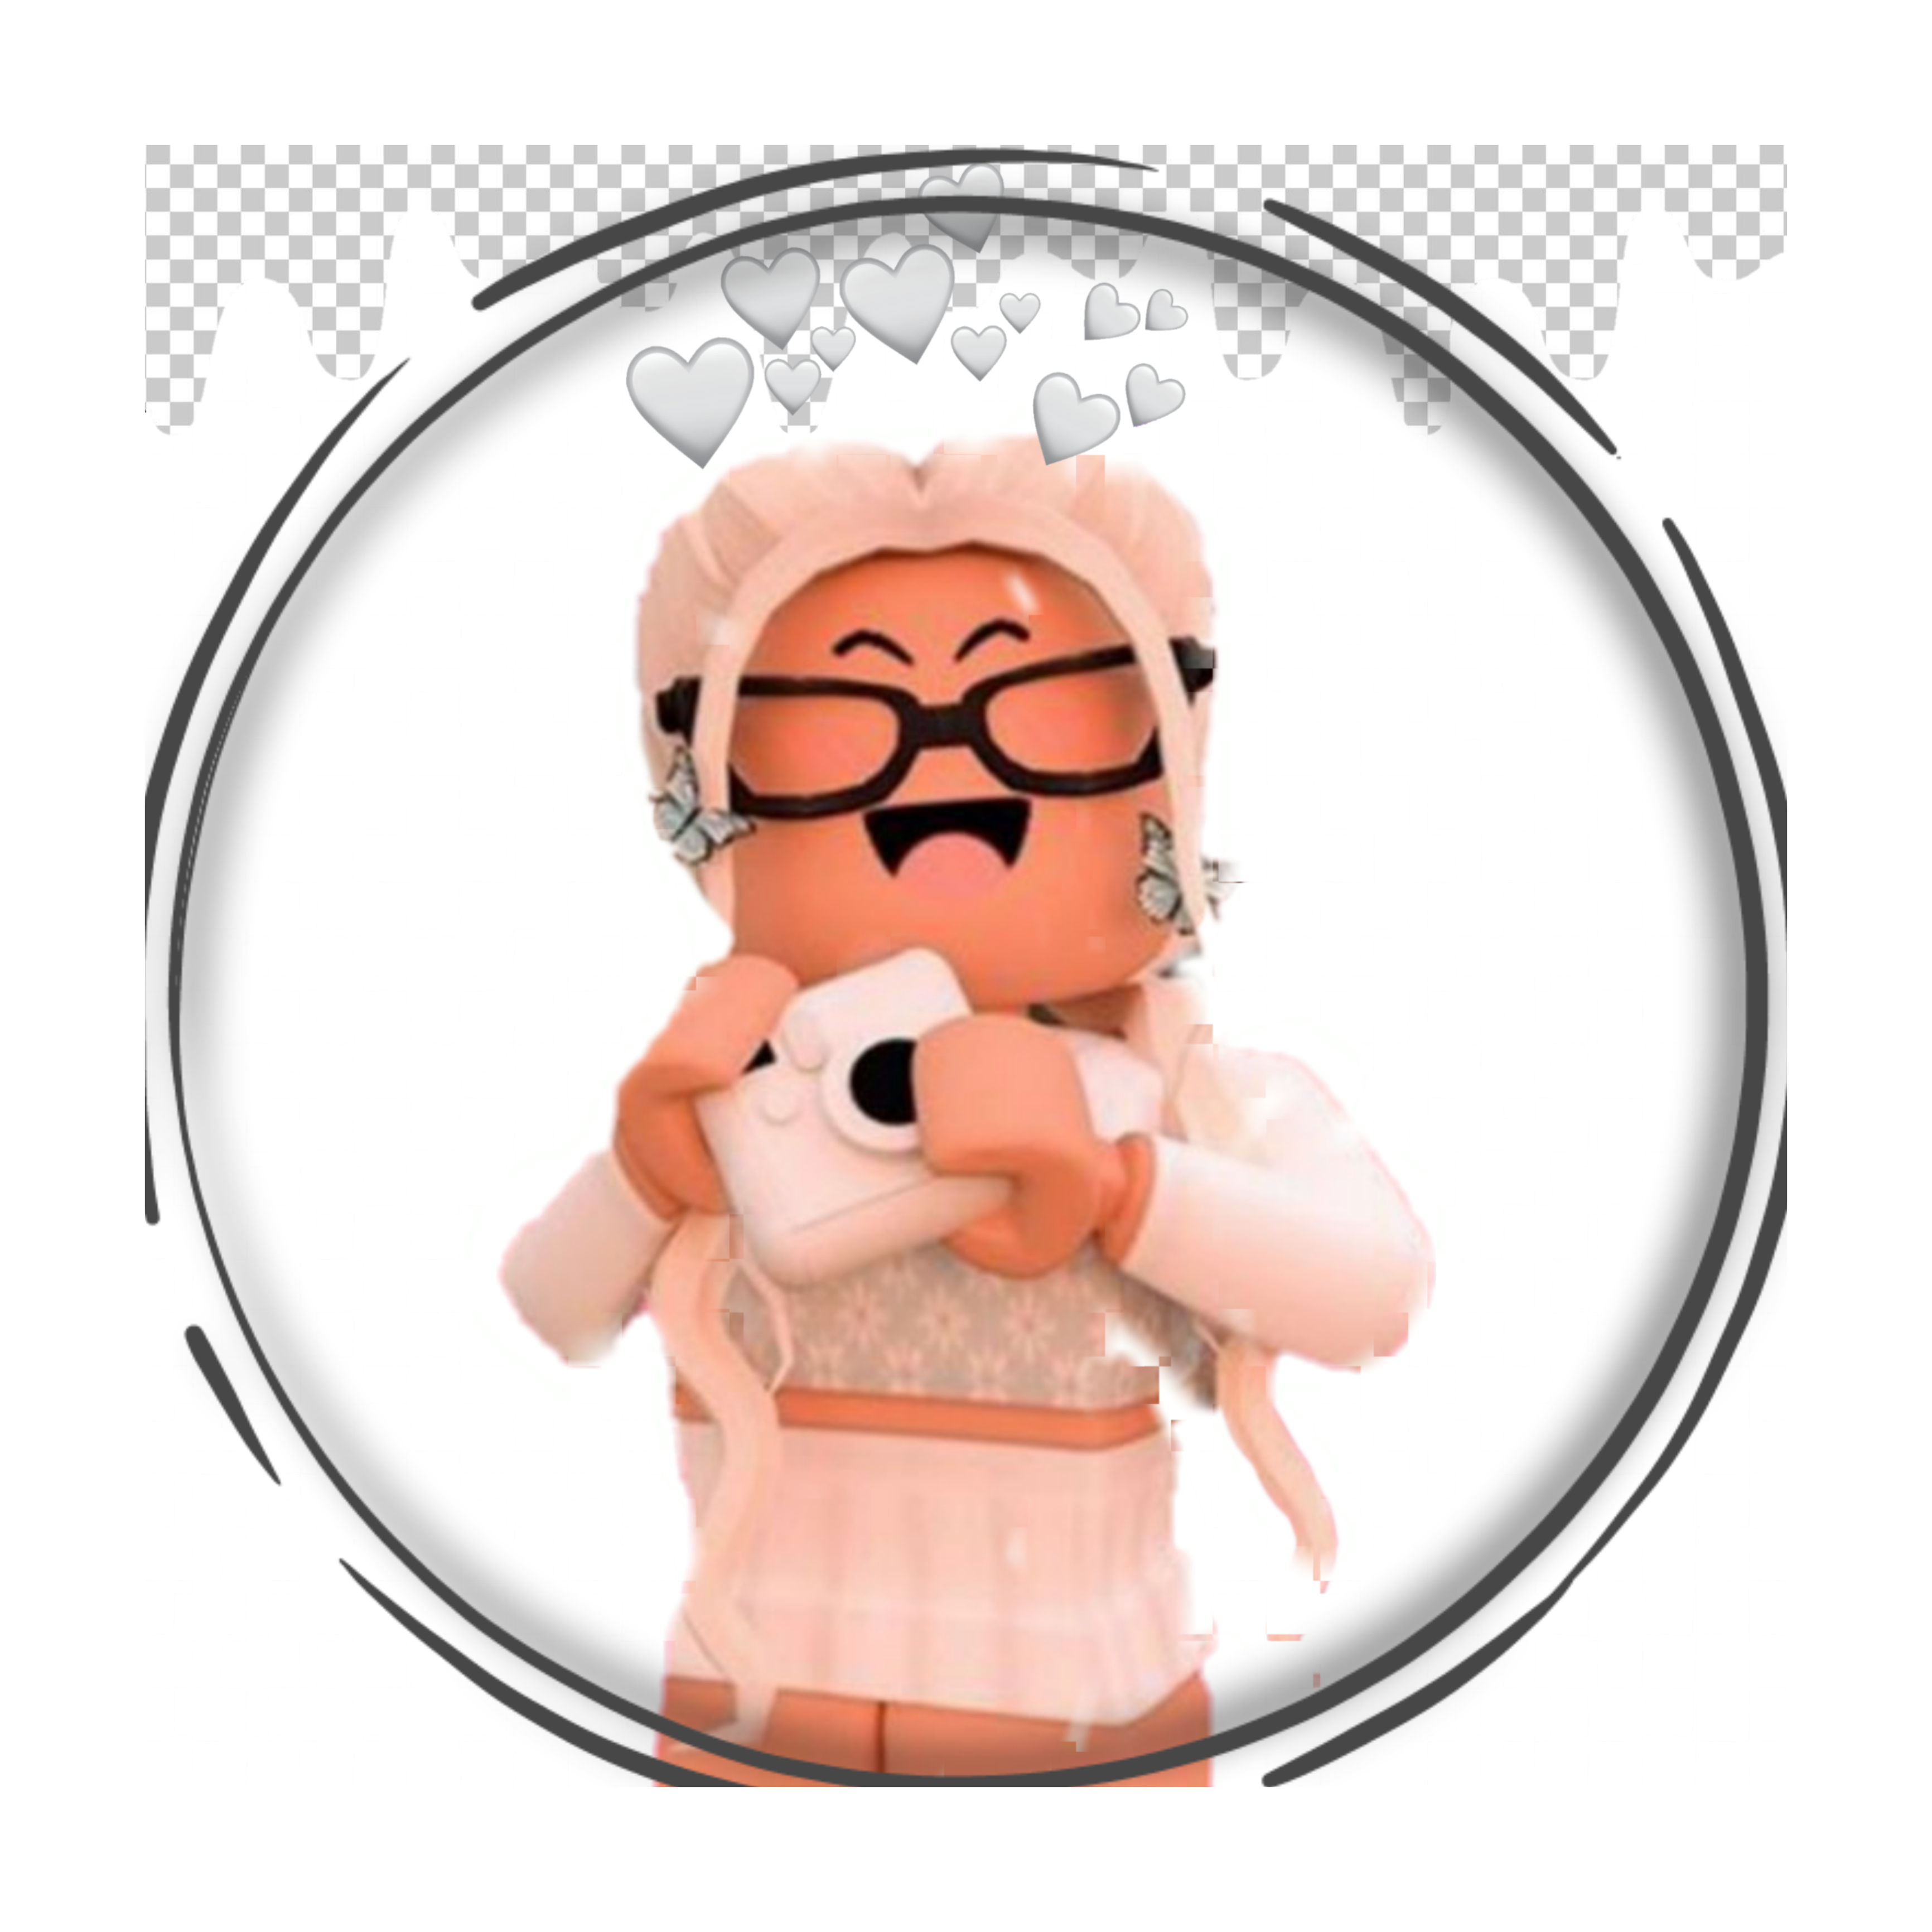 How To Make Aesthetic Roblox Pfp - aesthetic roblox pfp blonde hair